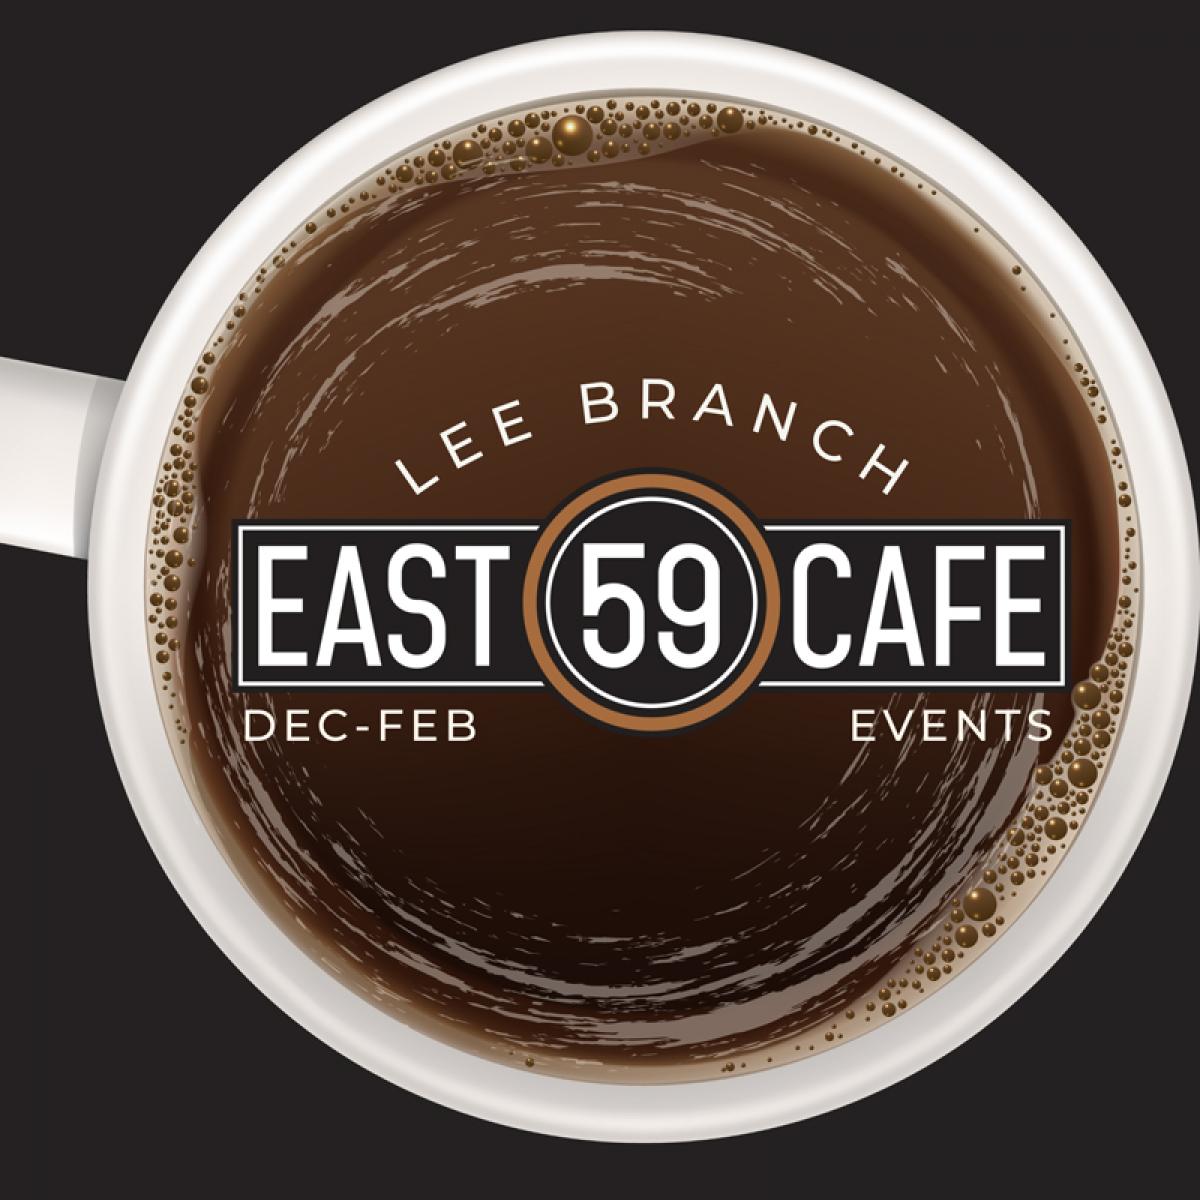 East 59 - Lee Branch Events